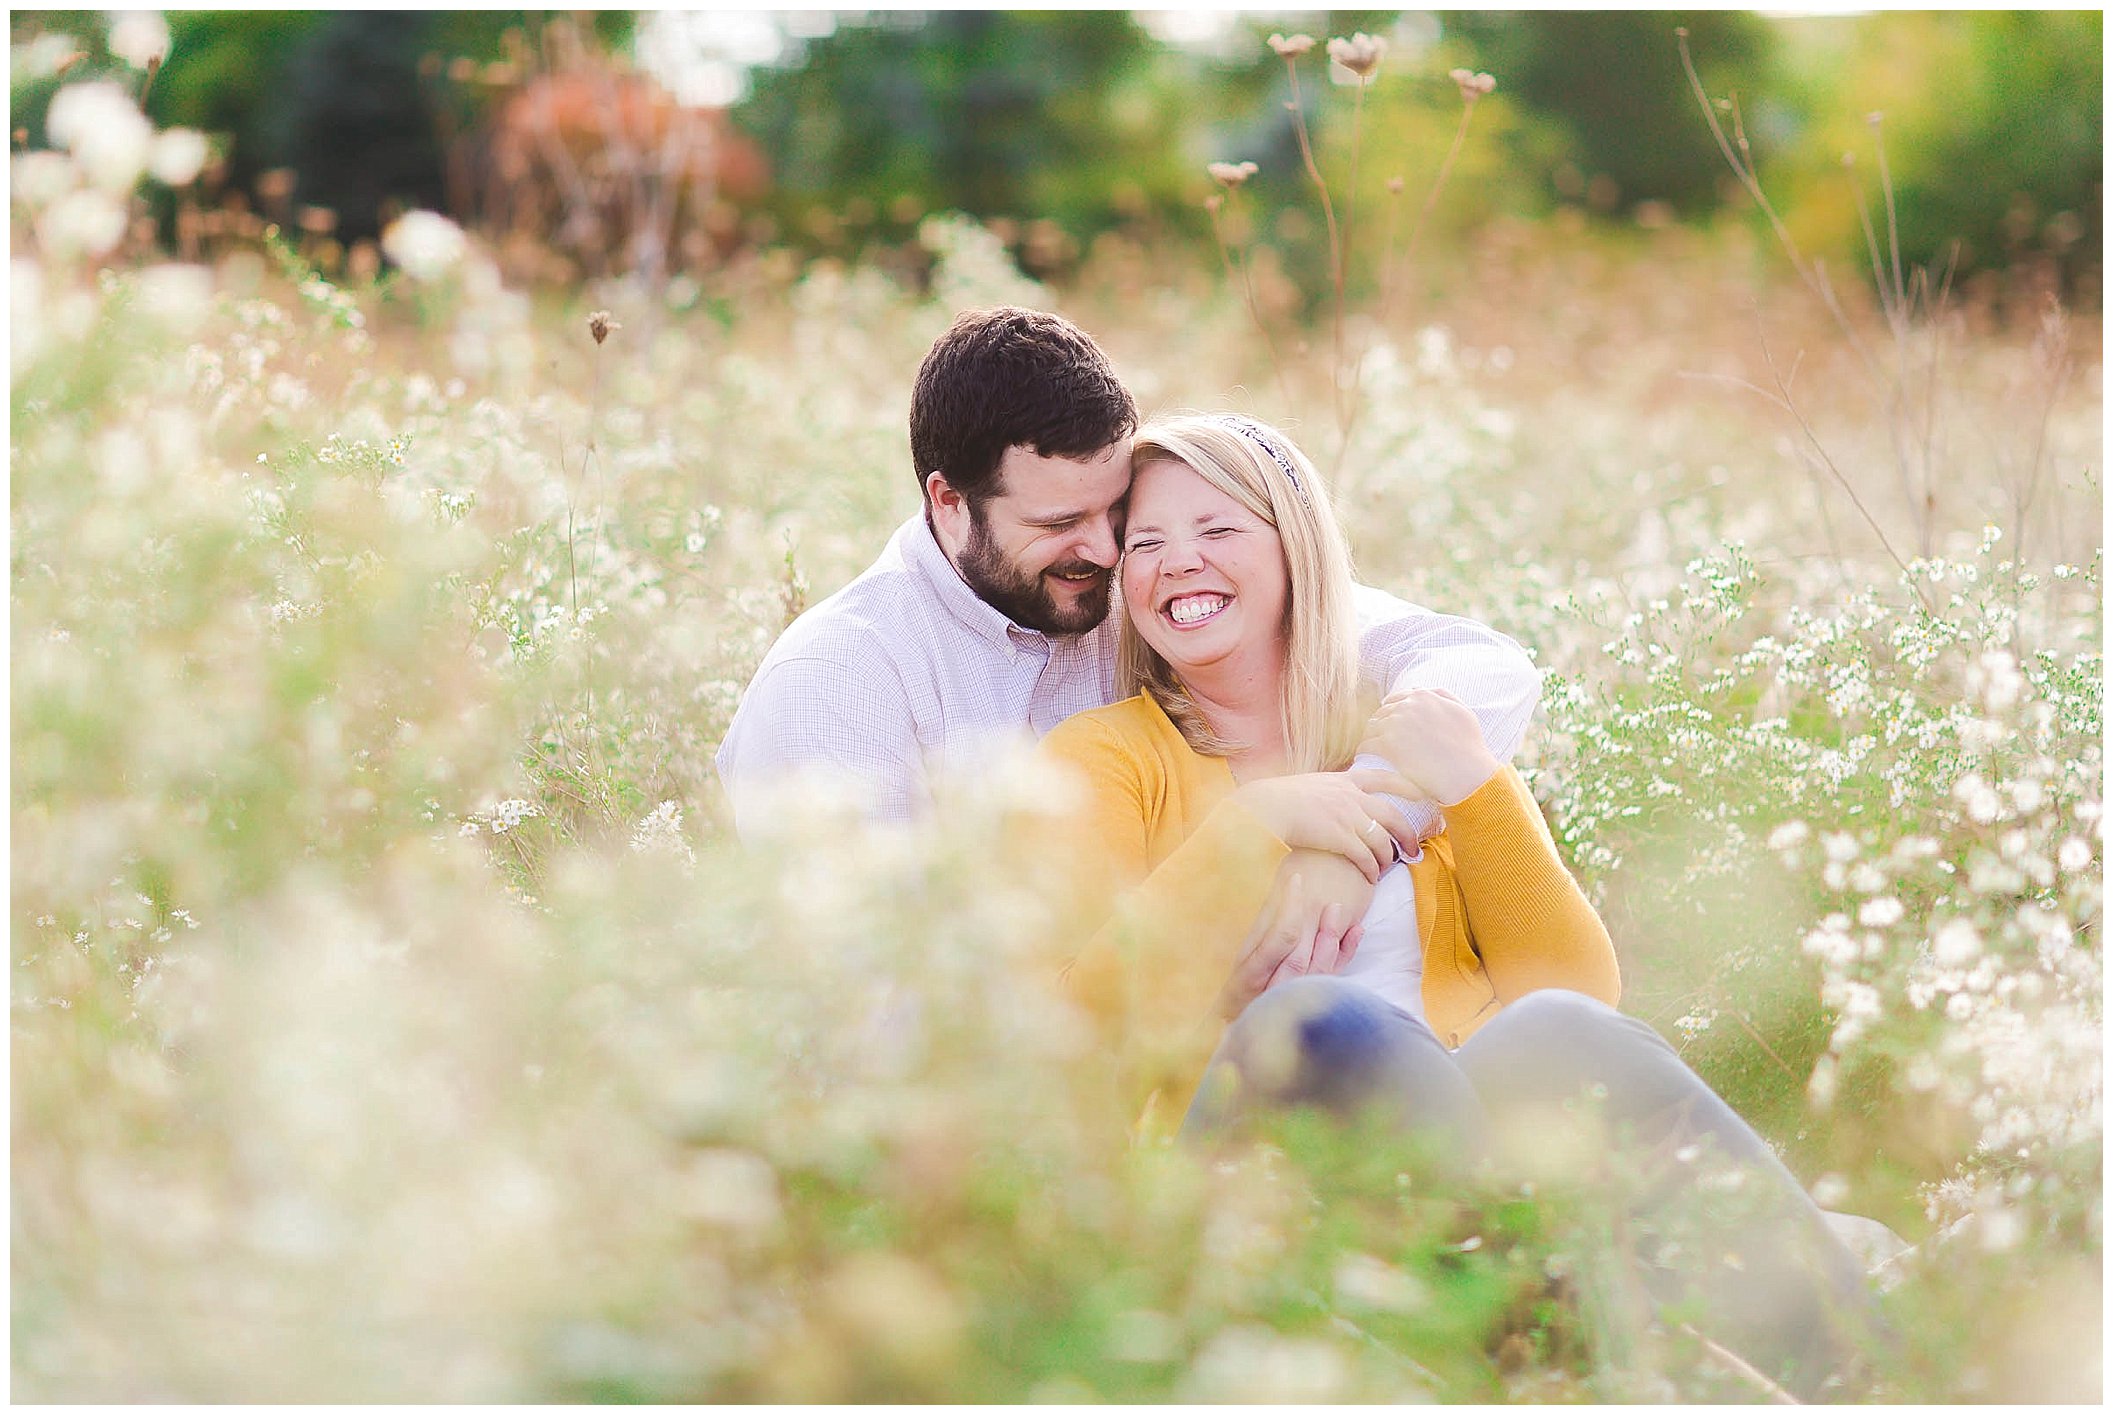 Sunshine filled engagement session in a field of wildflowers, Fort Wayne Indiana Wedding Photographer_0010.jpg